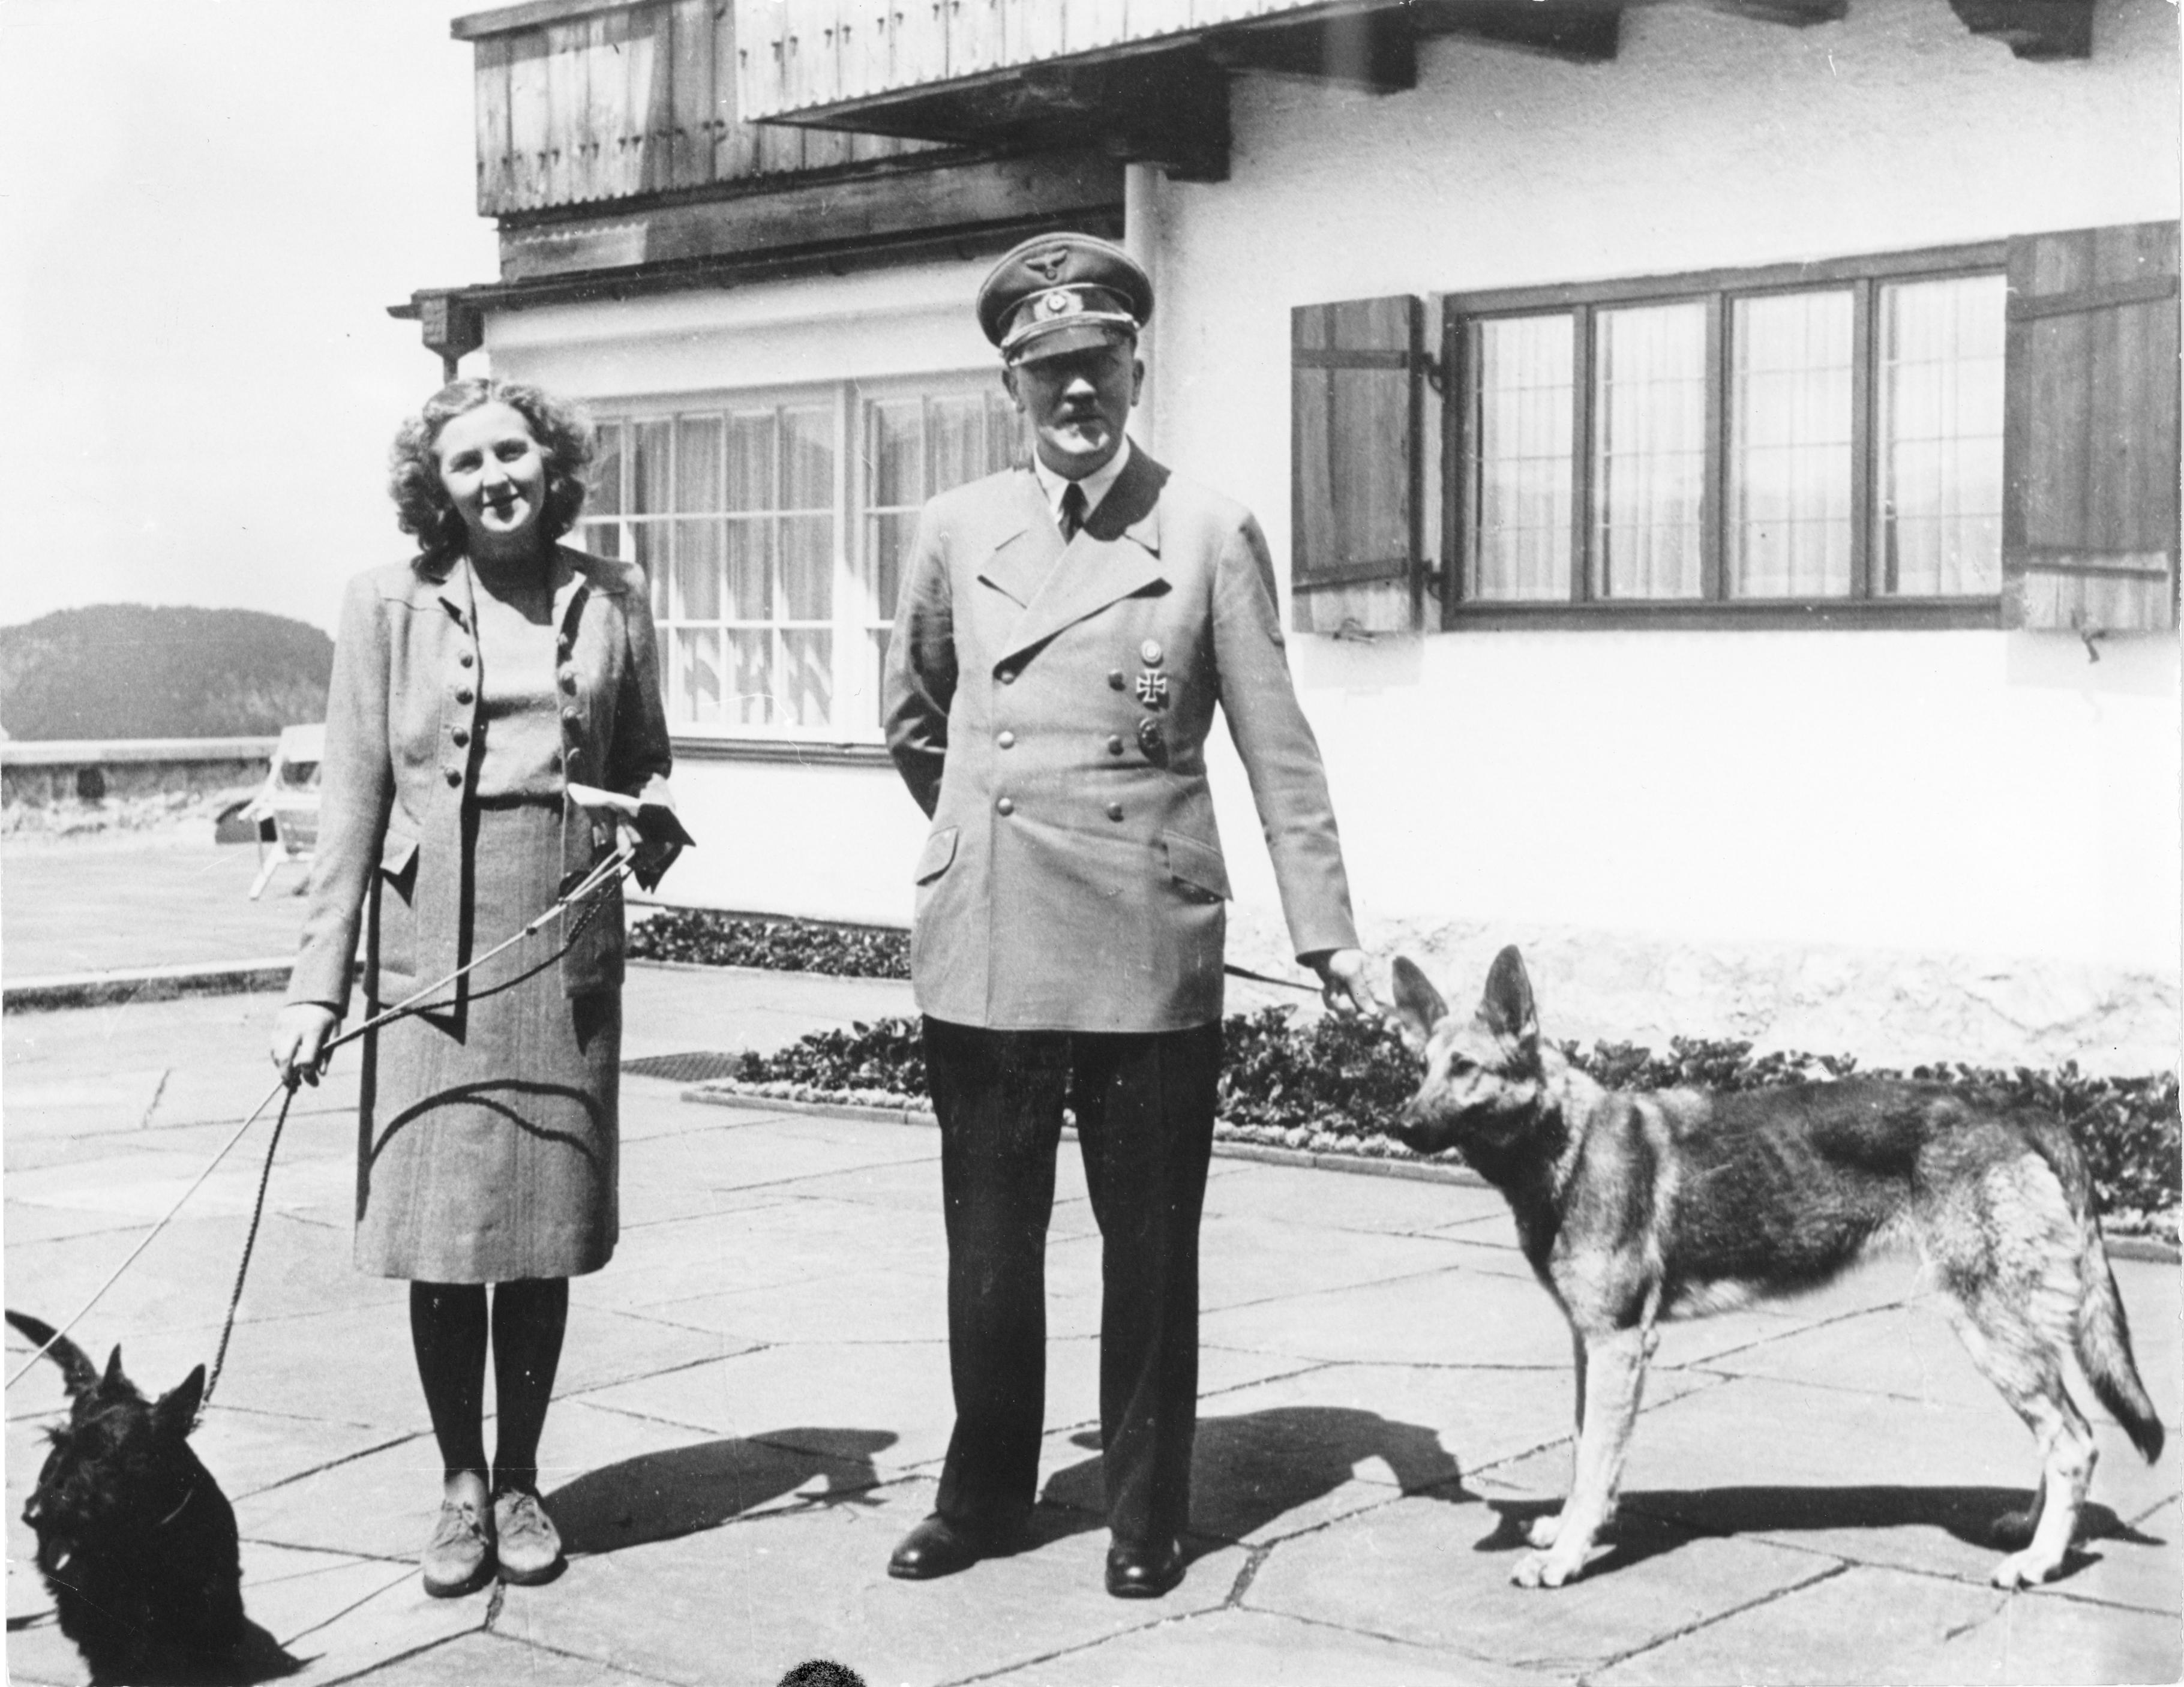 Adolf Hitler and Eva Braun with dogs at the Berghof.Bundesarchiv